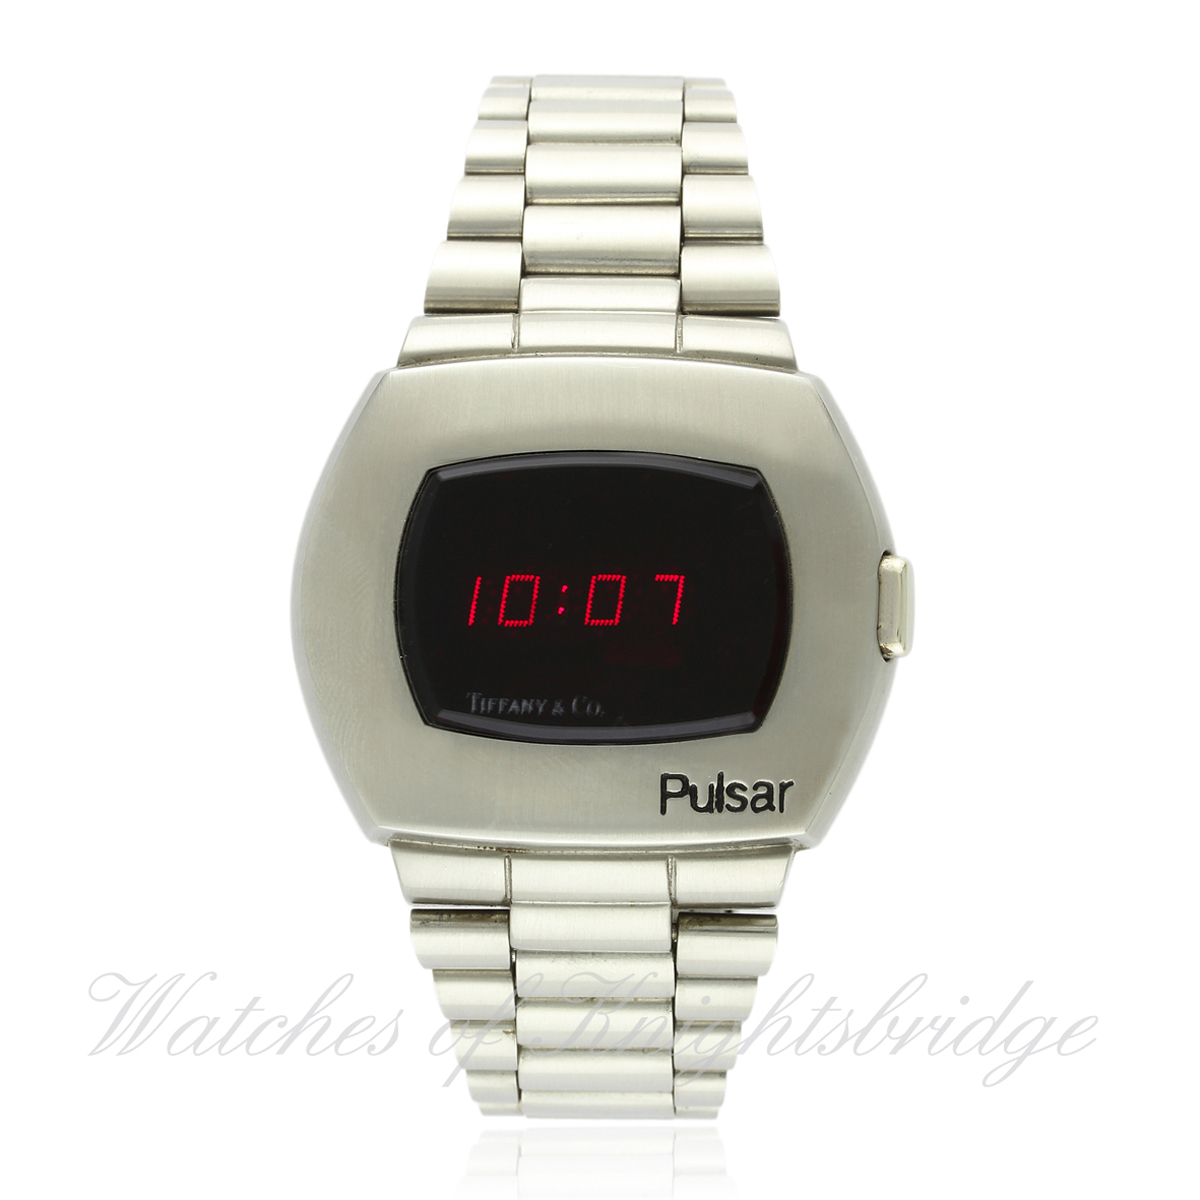 A GENTLEMAN`S STAINLESS STEEL PULSAR BRACELET WATCH CIRCA 1980s, RETAILED BY TIFFANY & CO. WITH